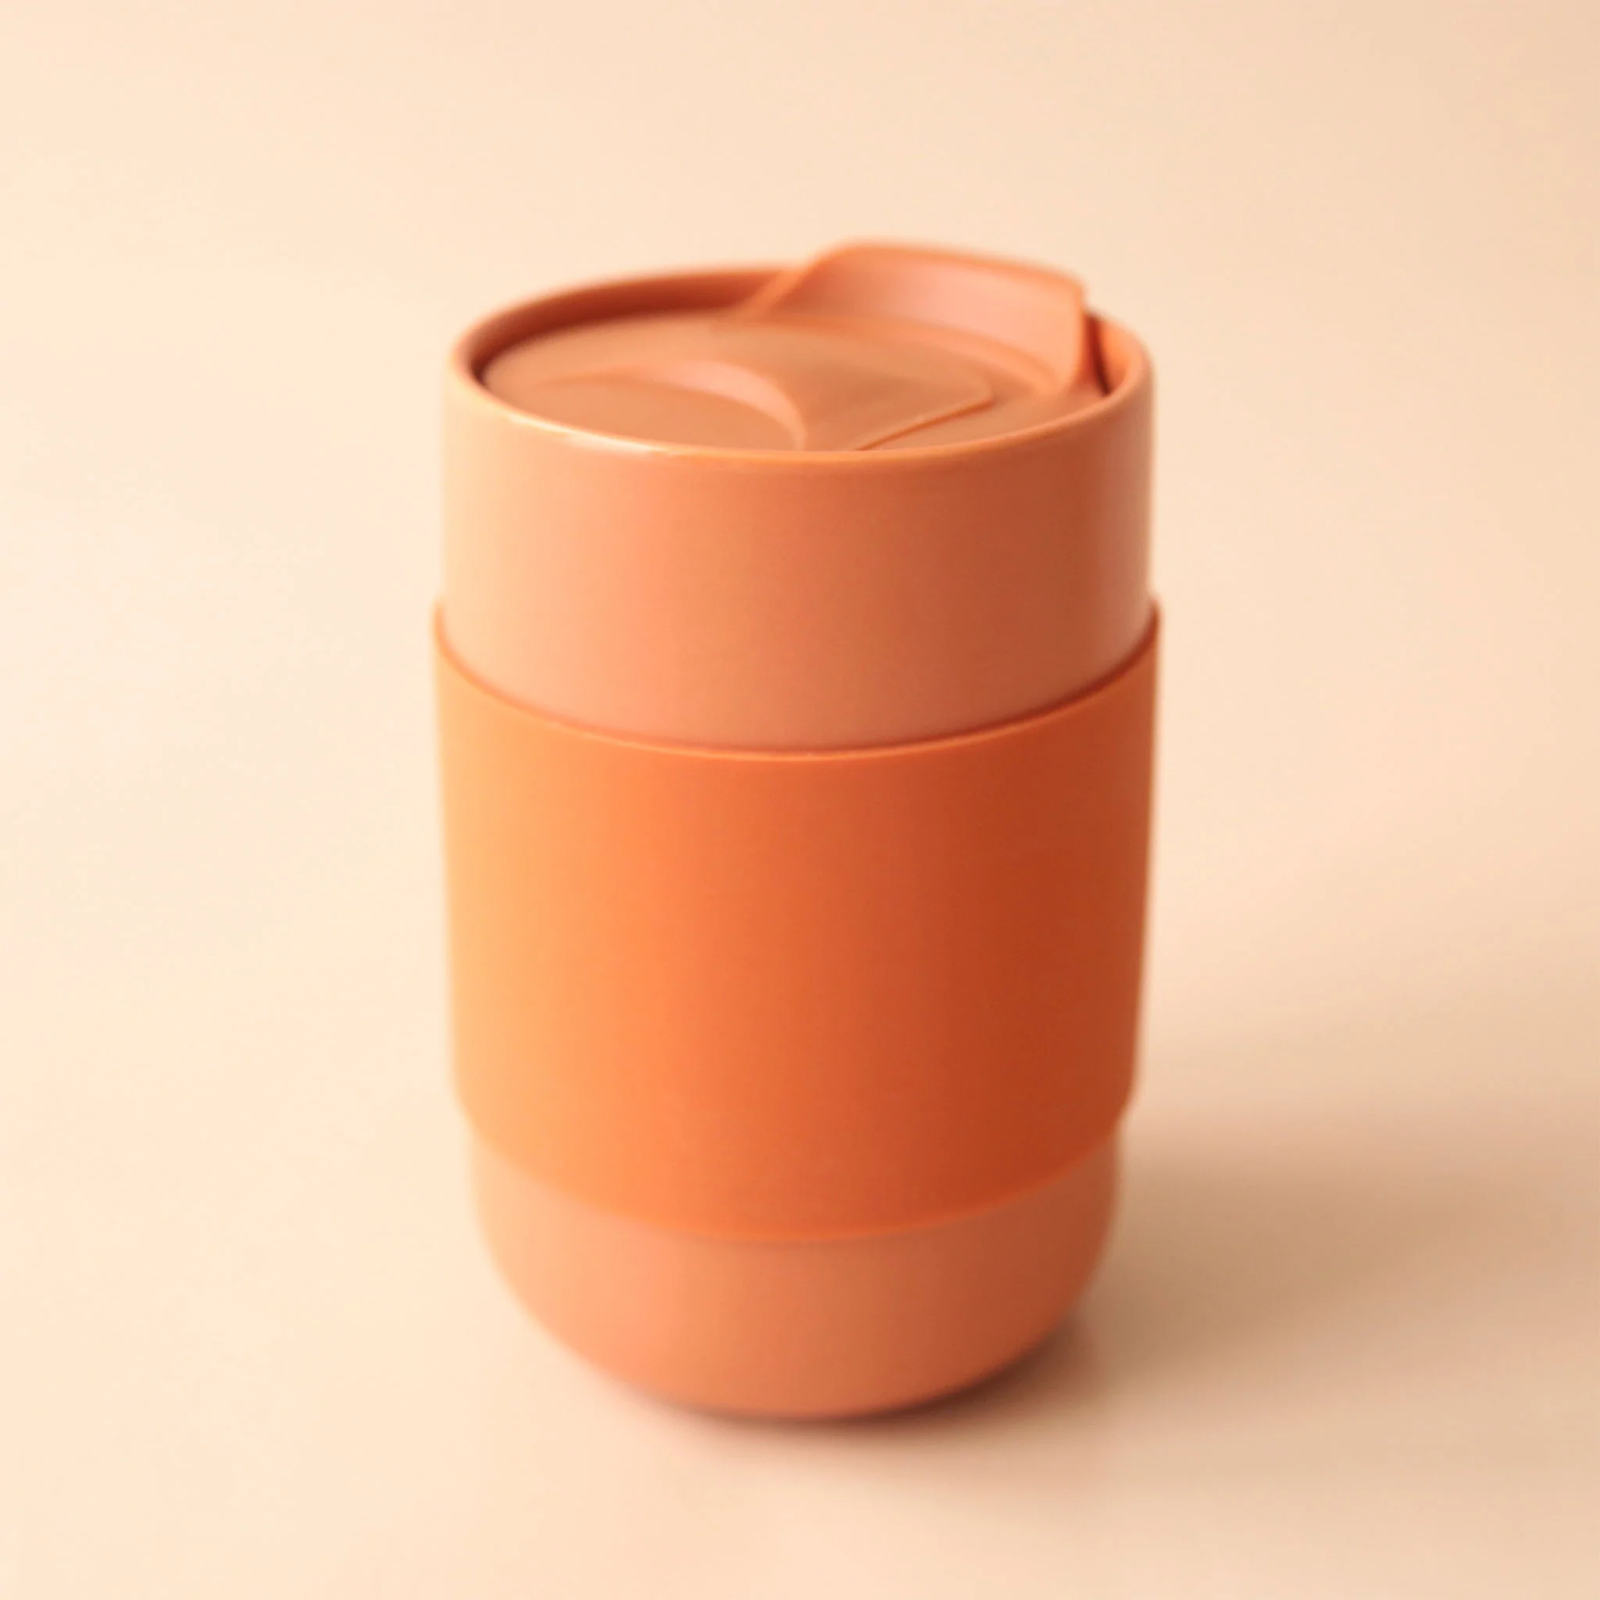 photo of a hot beverage tumbler in terracotta color